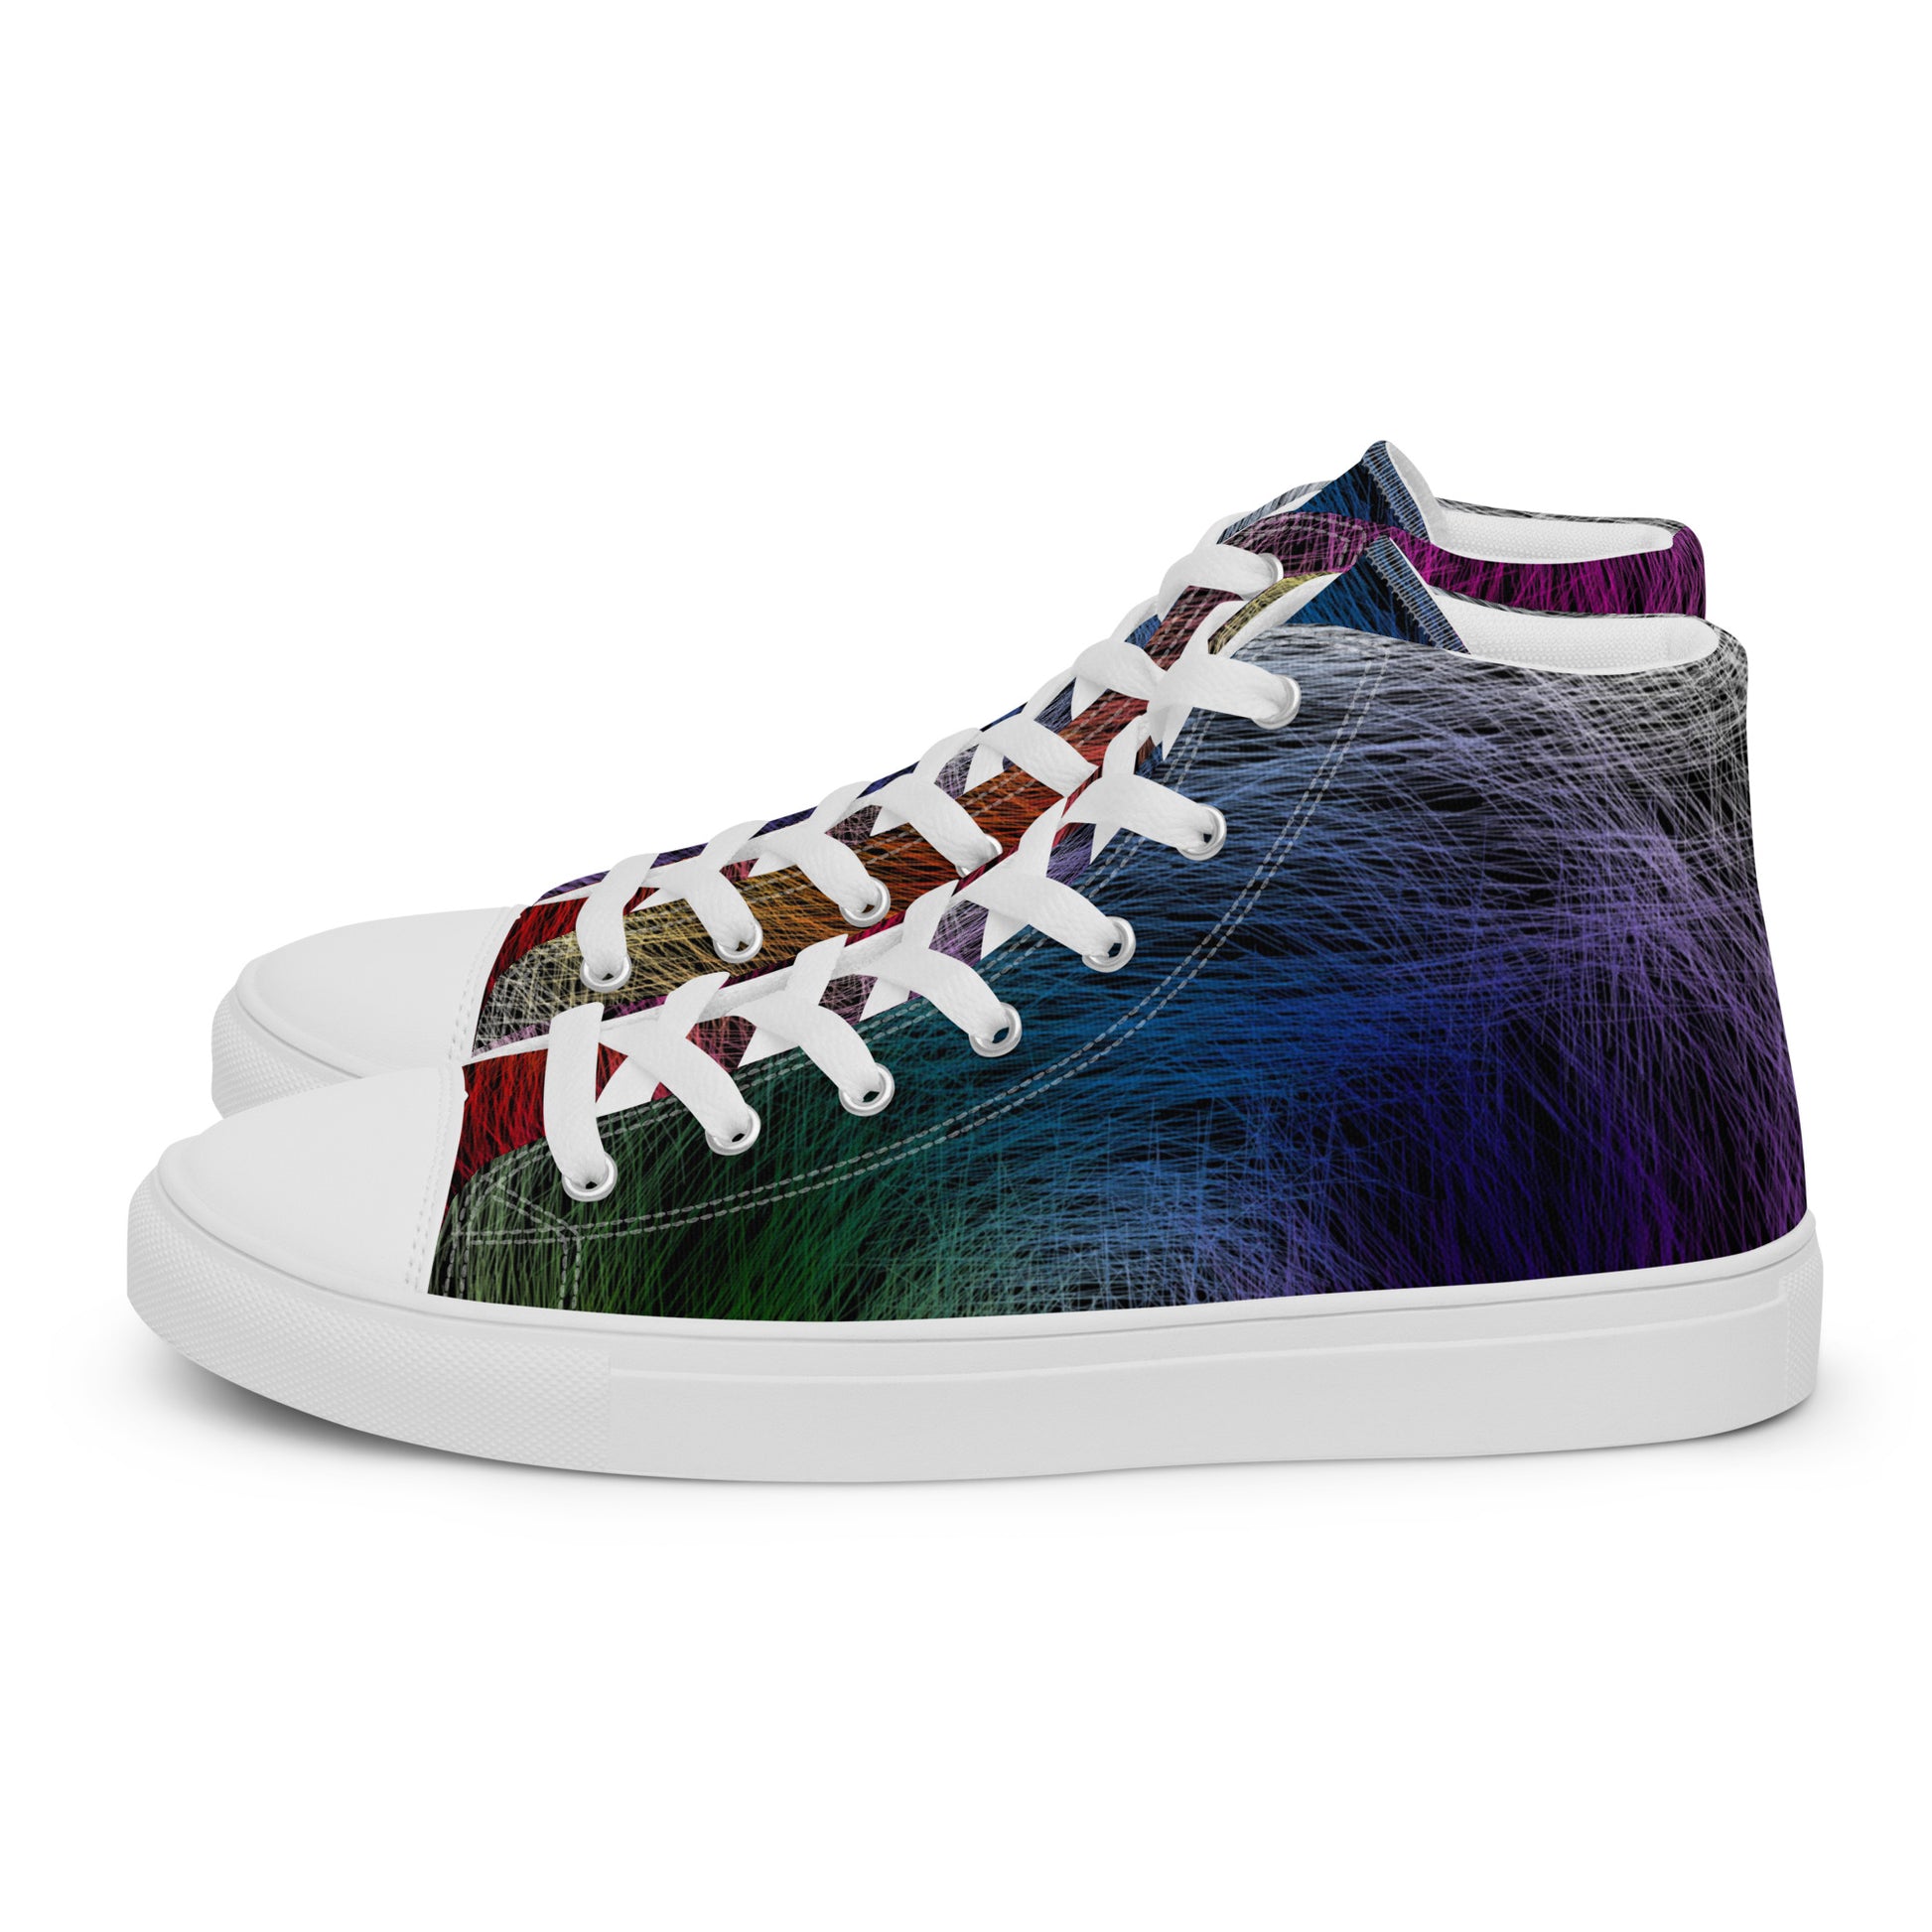 Wild Rainbow Women’s High Top Canvas Shoes | Casual LGBTQ+ Shoes | Stylish Festival Sneakers | Pride Shoes | Lace Up Sneakers | - Comfortable Culture - 5 - Shoes - Comfortable Culture